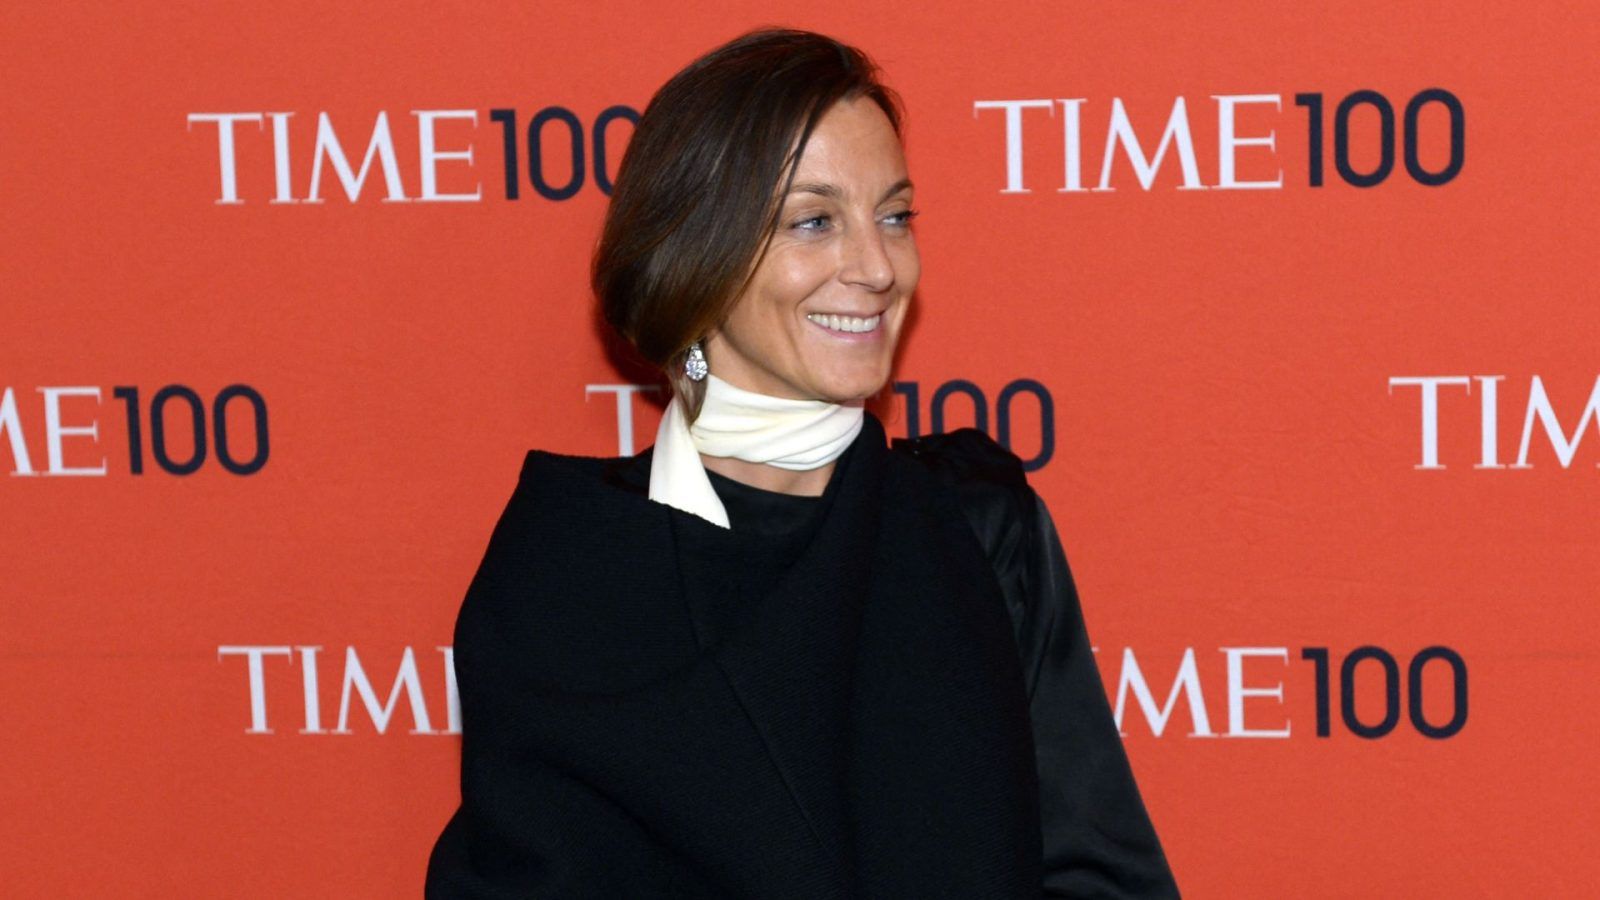 Phoebe Philo Returns in September 2023: Sound the Trumpets! — Anne